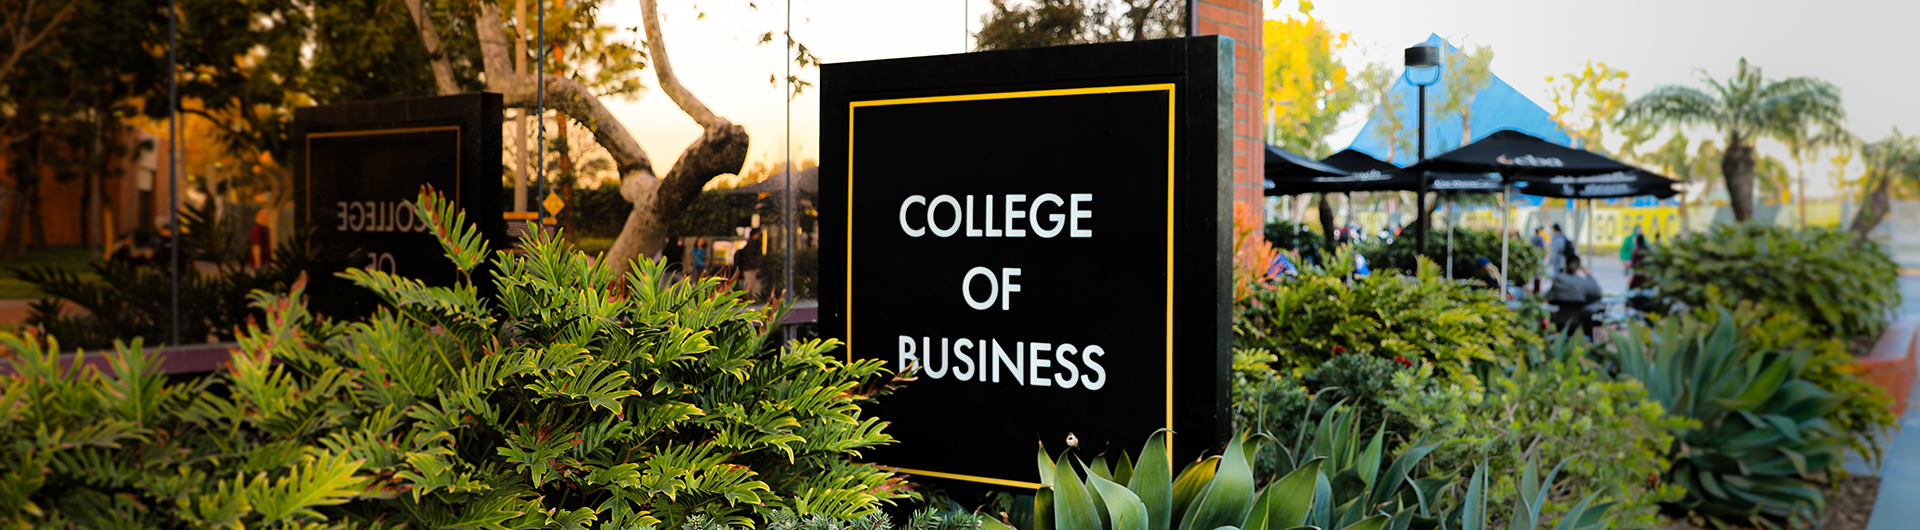 About, College of Business